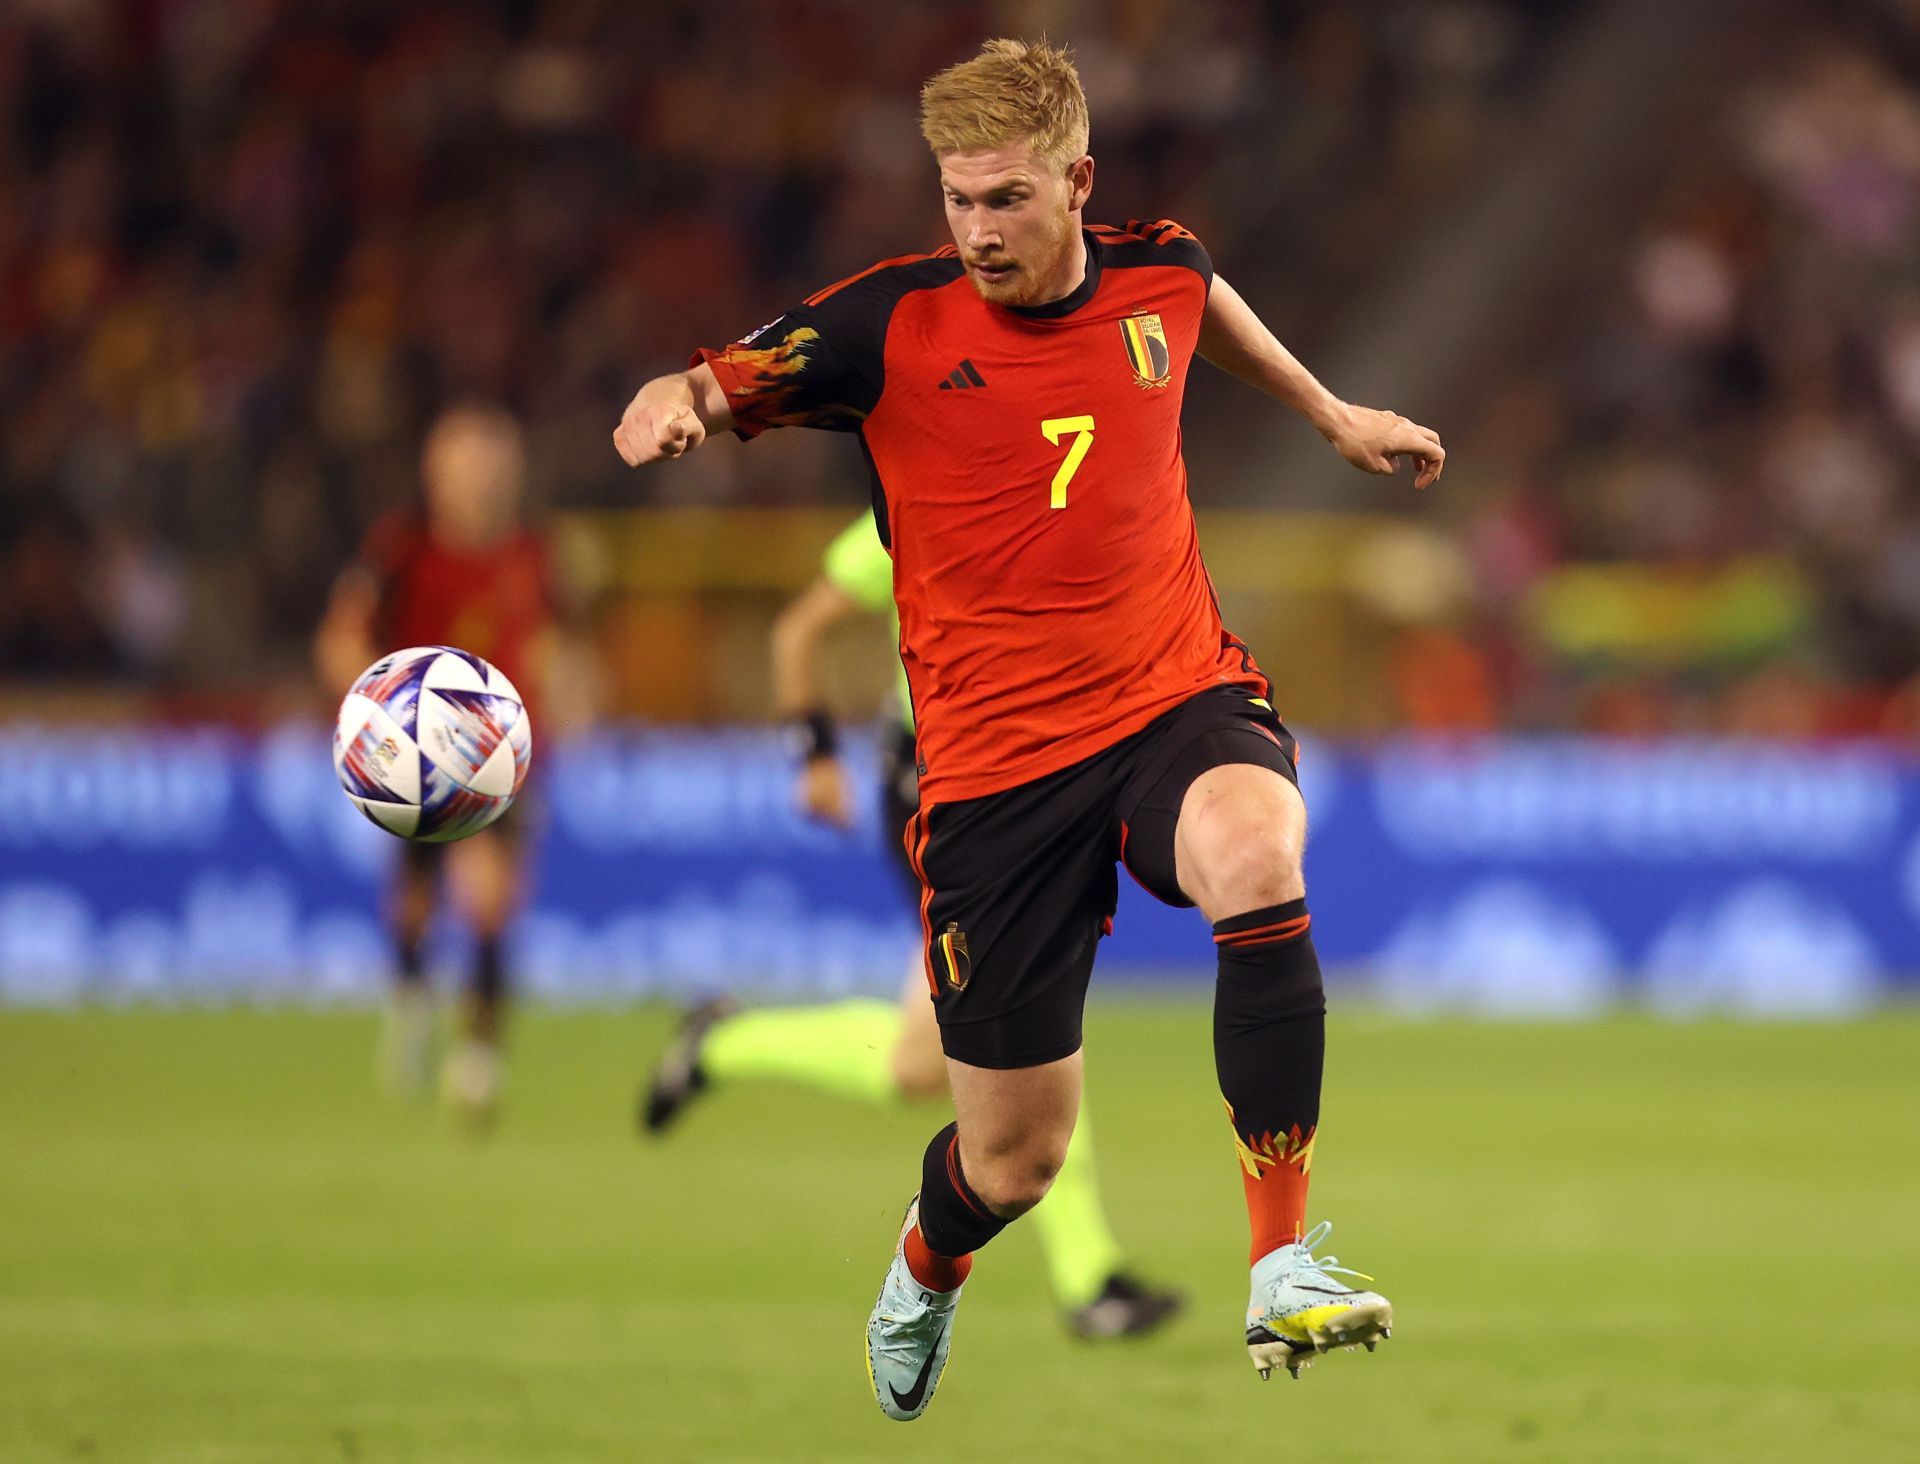 Kevin De Bruyne is expected to be the heartbeat of his national team at the 2022 FIFA World Cup